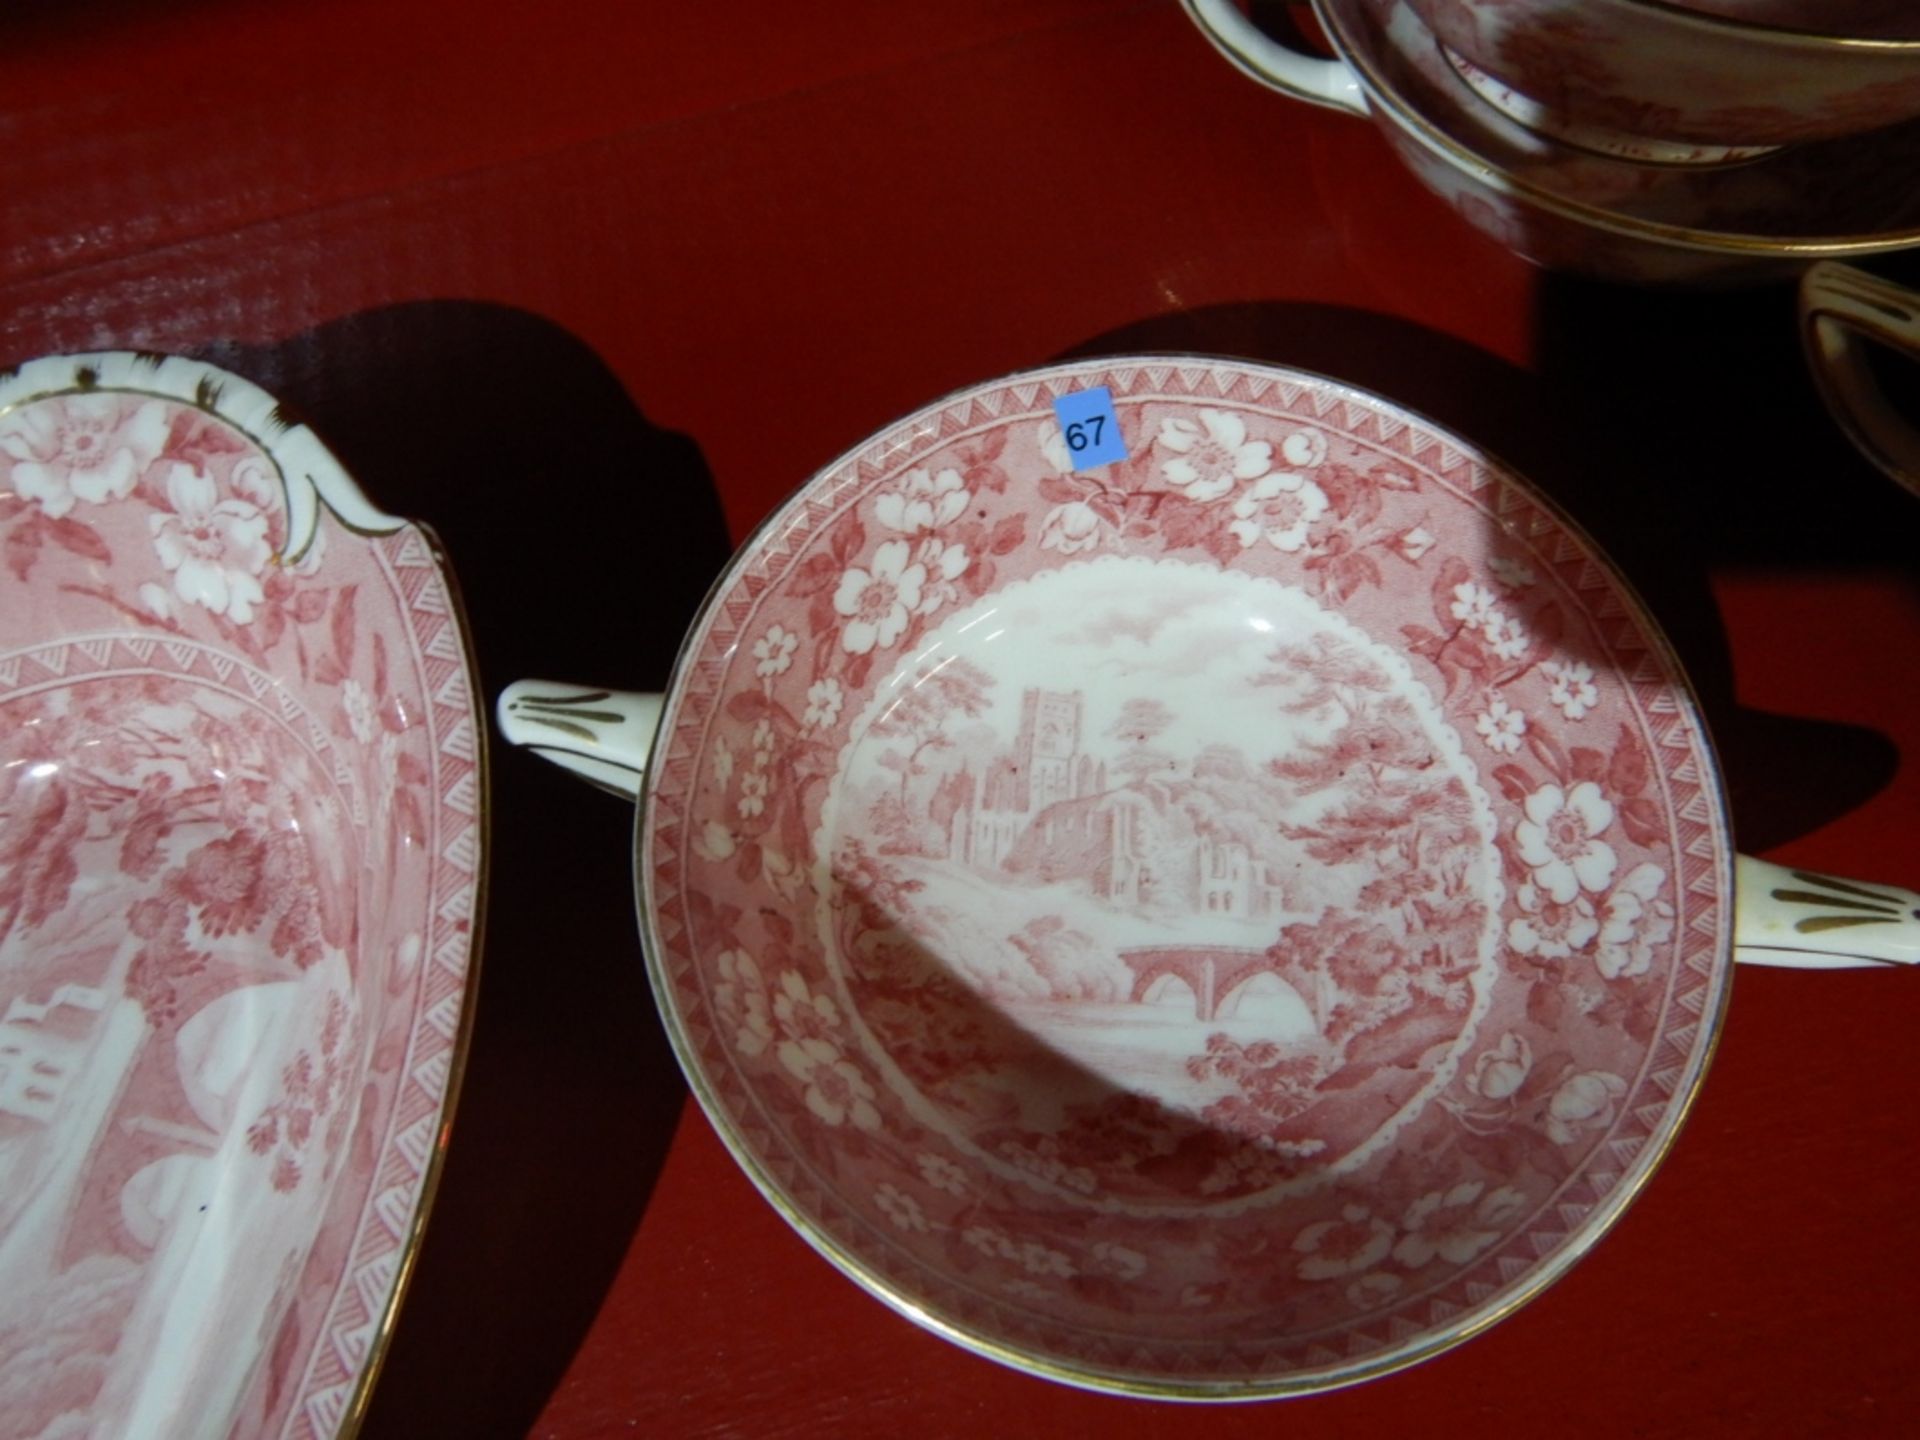 ANTIQUE "RADFORD TOWER" CHINA - COMPLETE DISH & CUP SET - Image 9 of 23